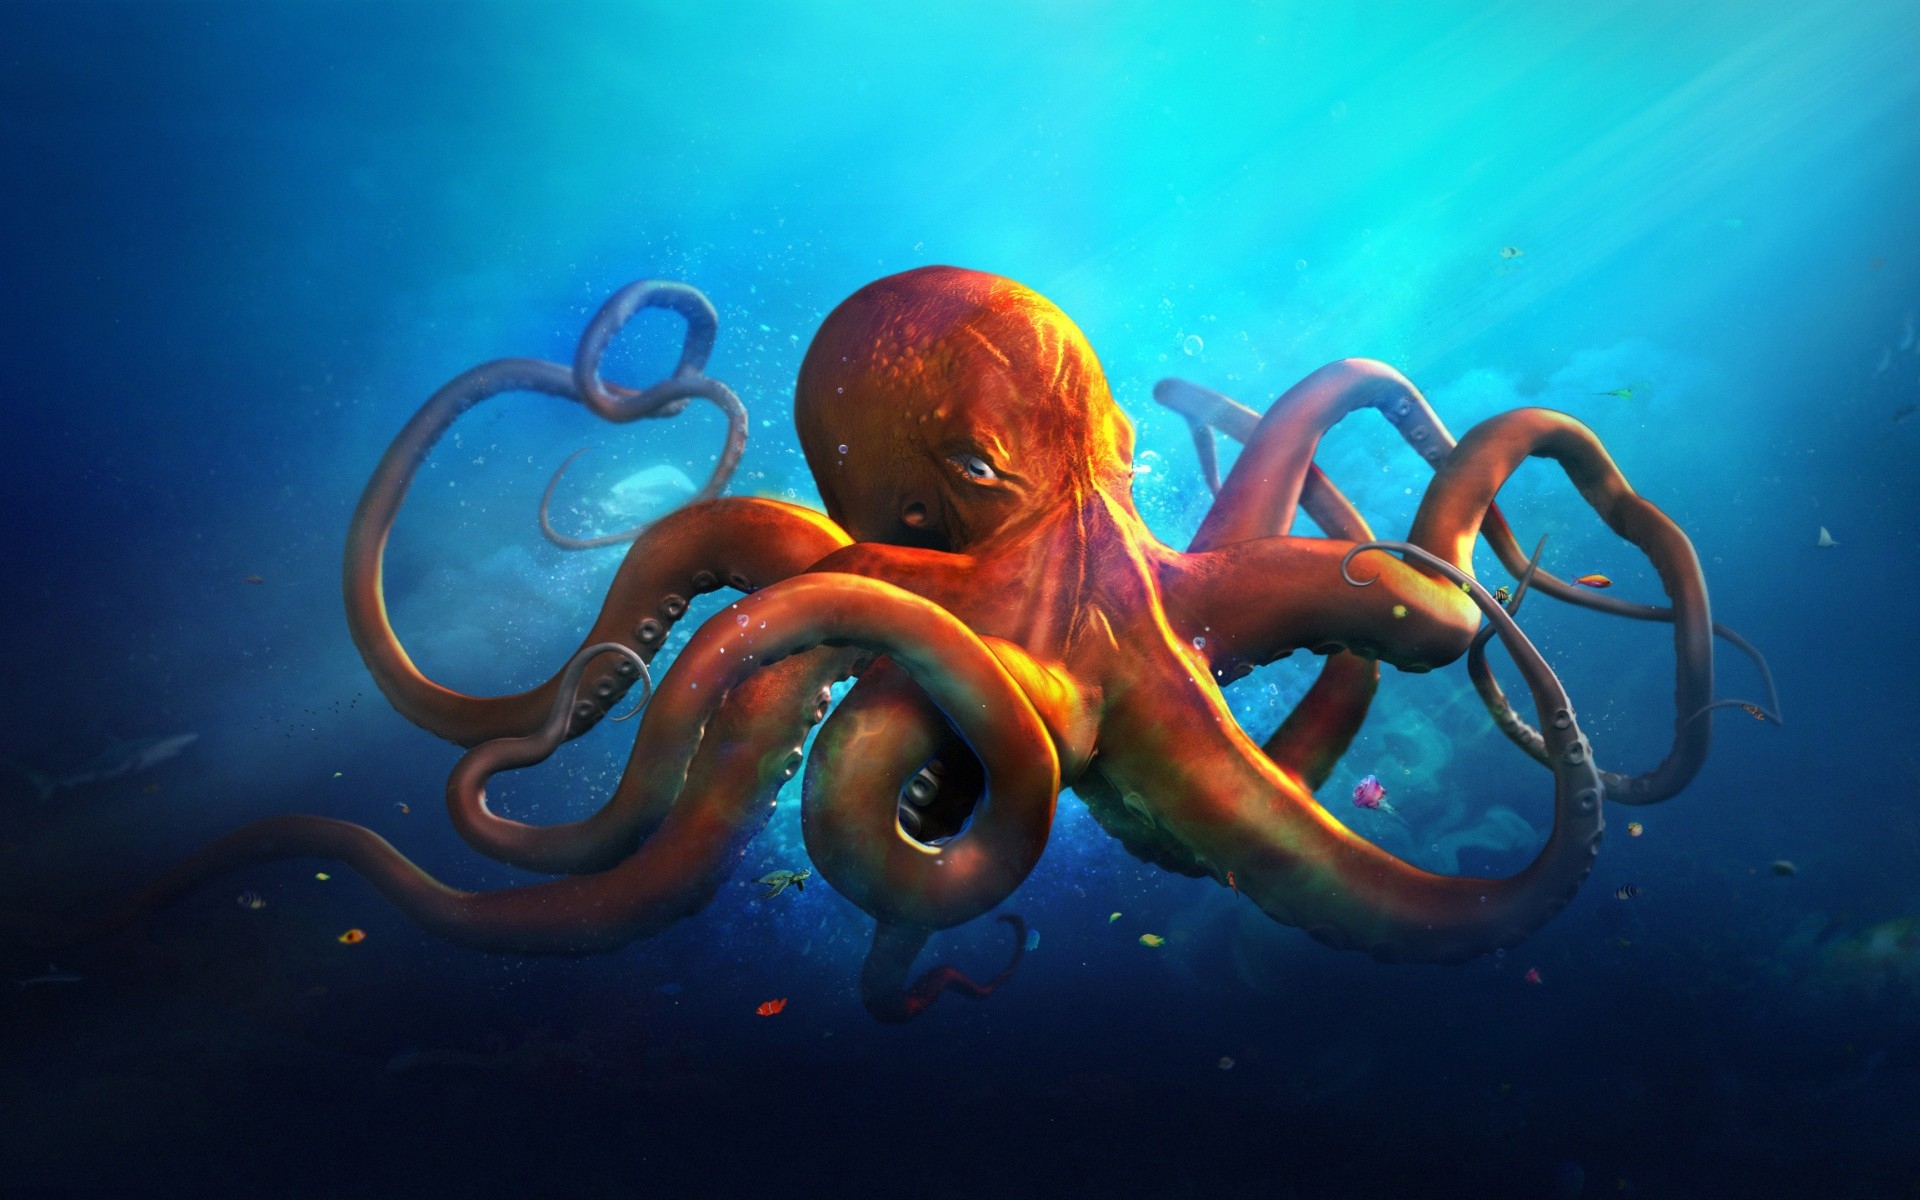 Octopus hd papers and backgrounds